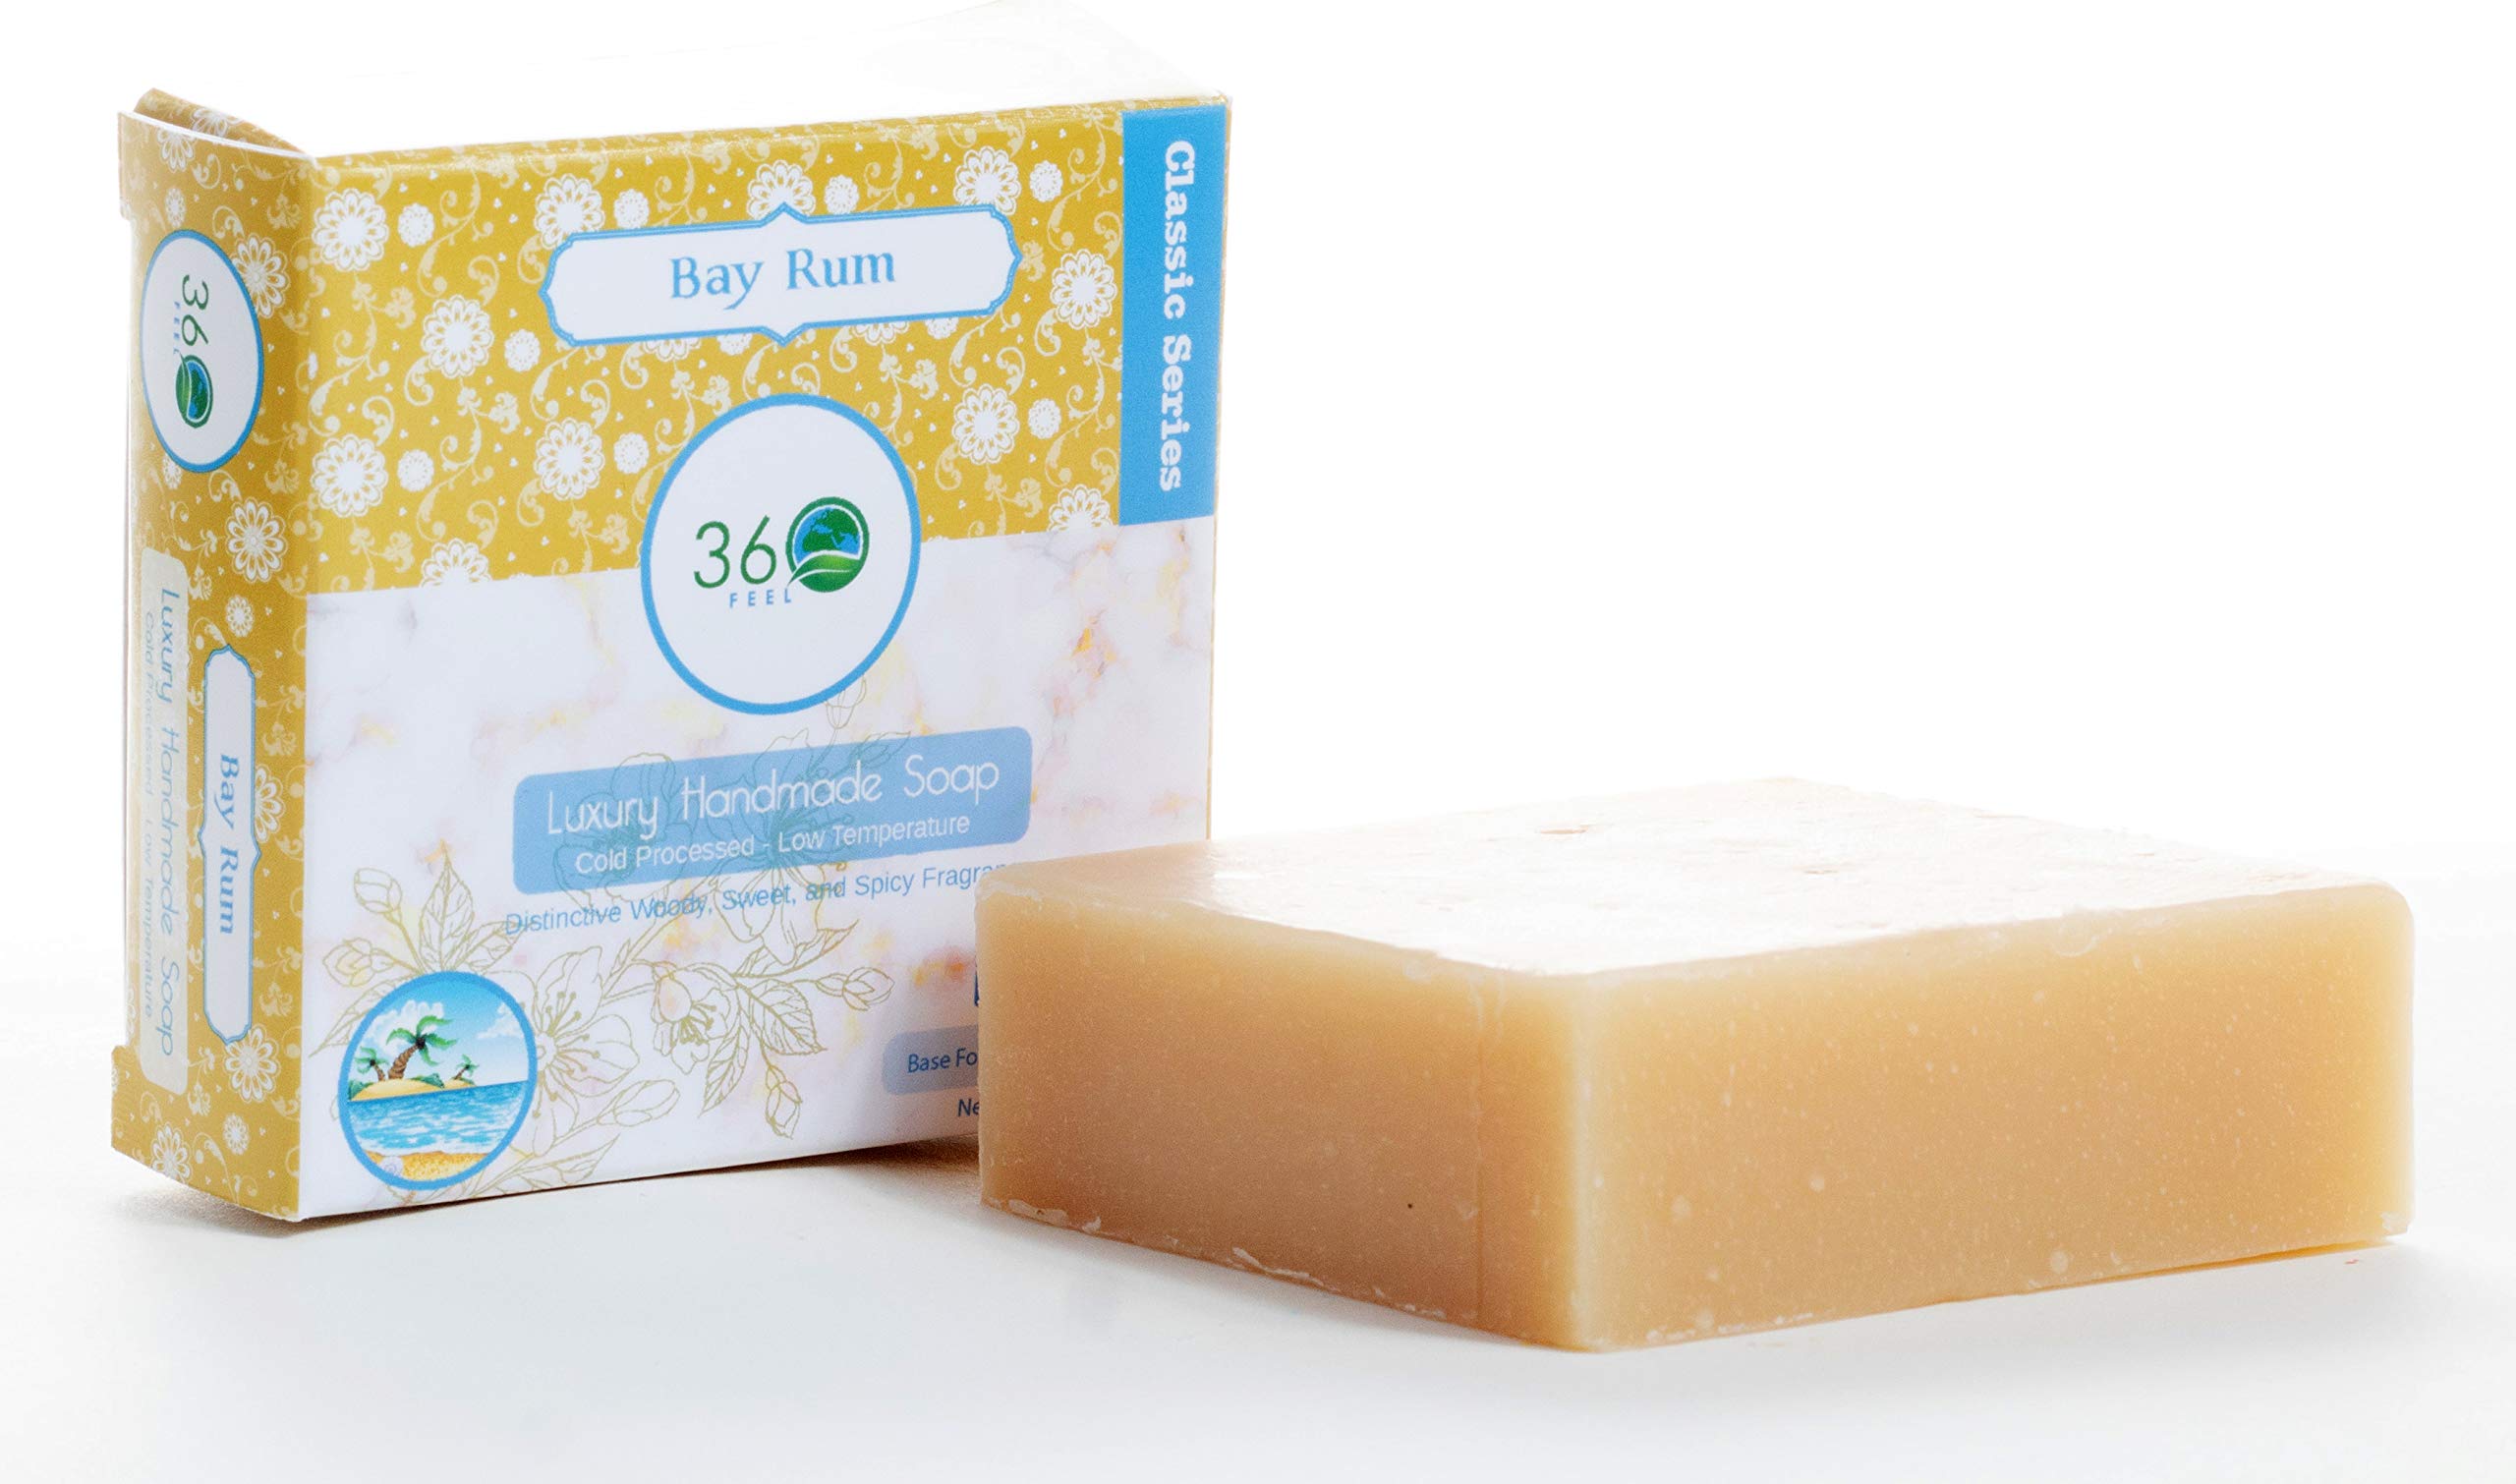 360Feel Bay Rum Soap - 5oz Handmade Mens Soap Bar with Natural Woodsy Sweet, Spicy Scent and Homemade Bay Rum Shaving Soap- Gift for Men - Castile Man Soaps bar - Gift ready